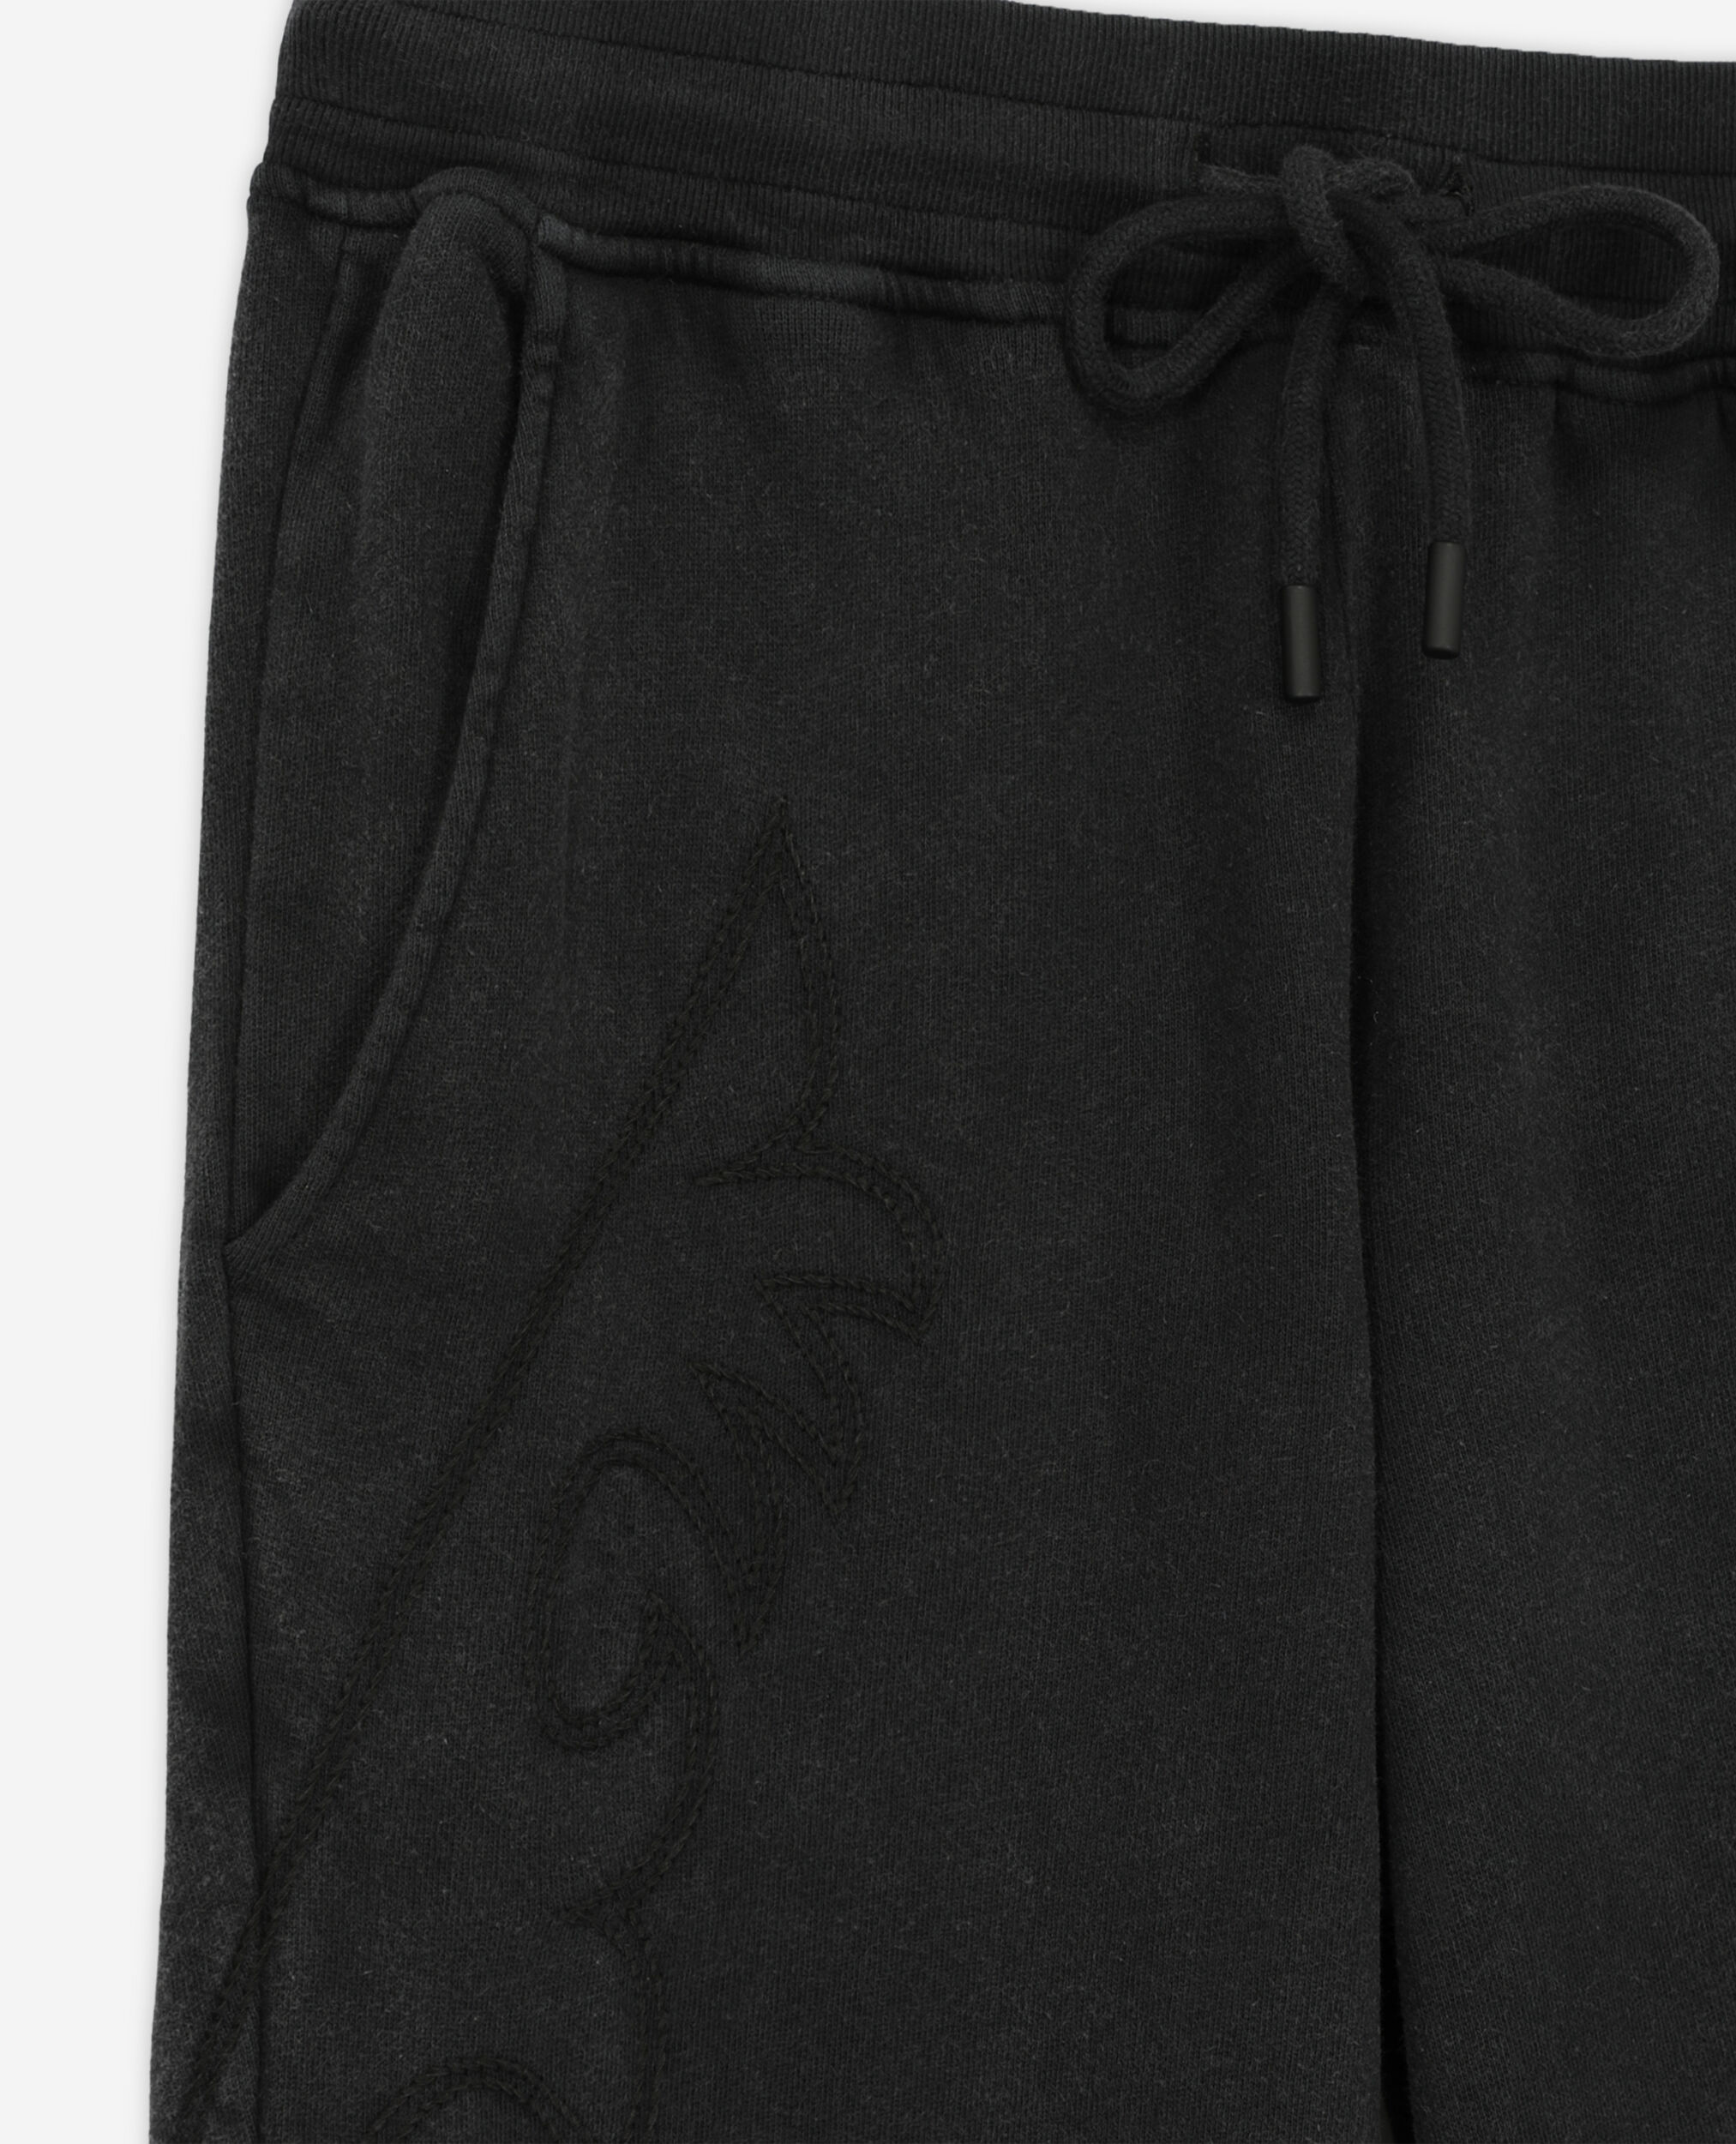 Black joggers with Western-style embroidery, BLACK WASHED, hi-res image number null